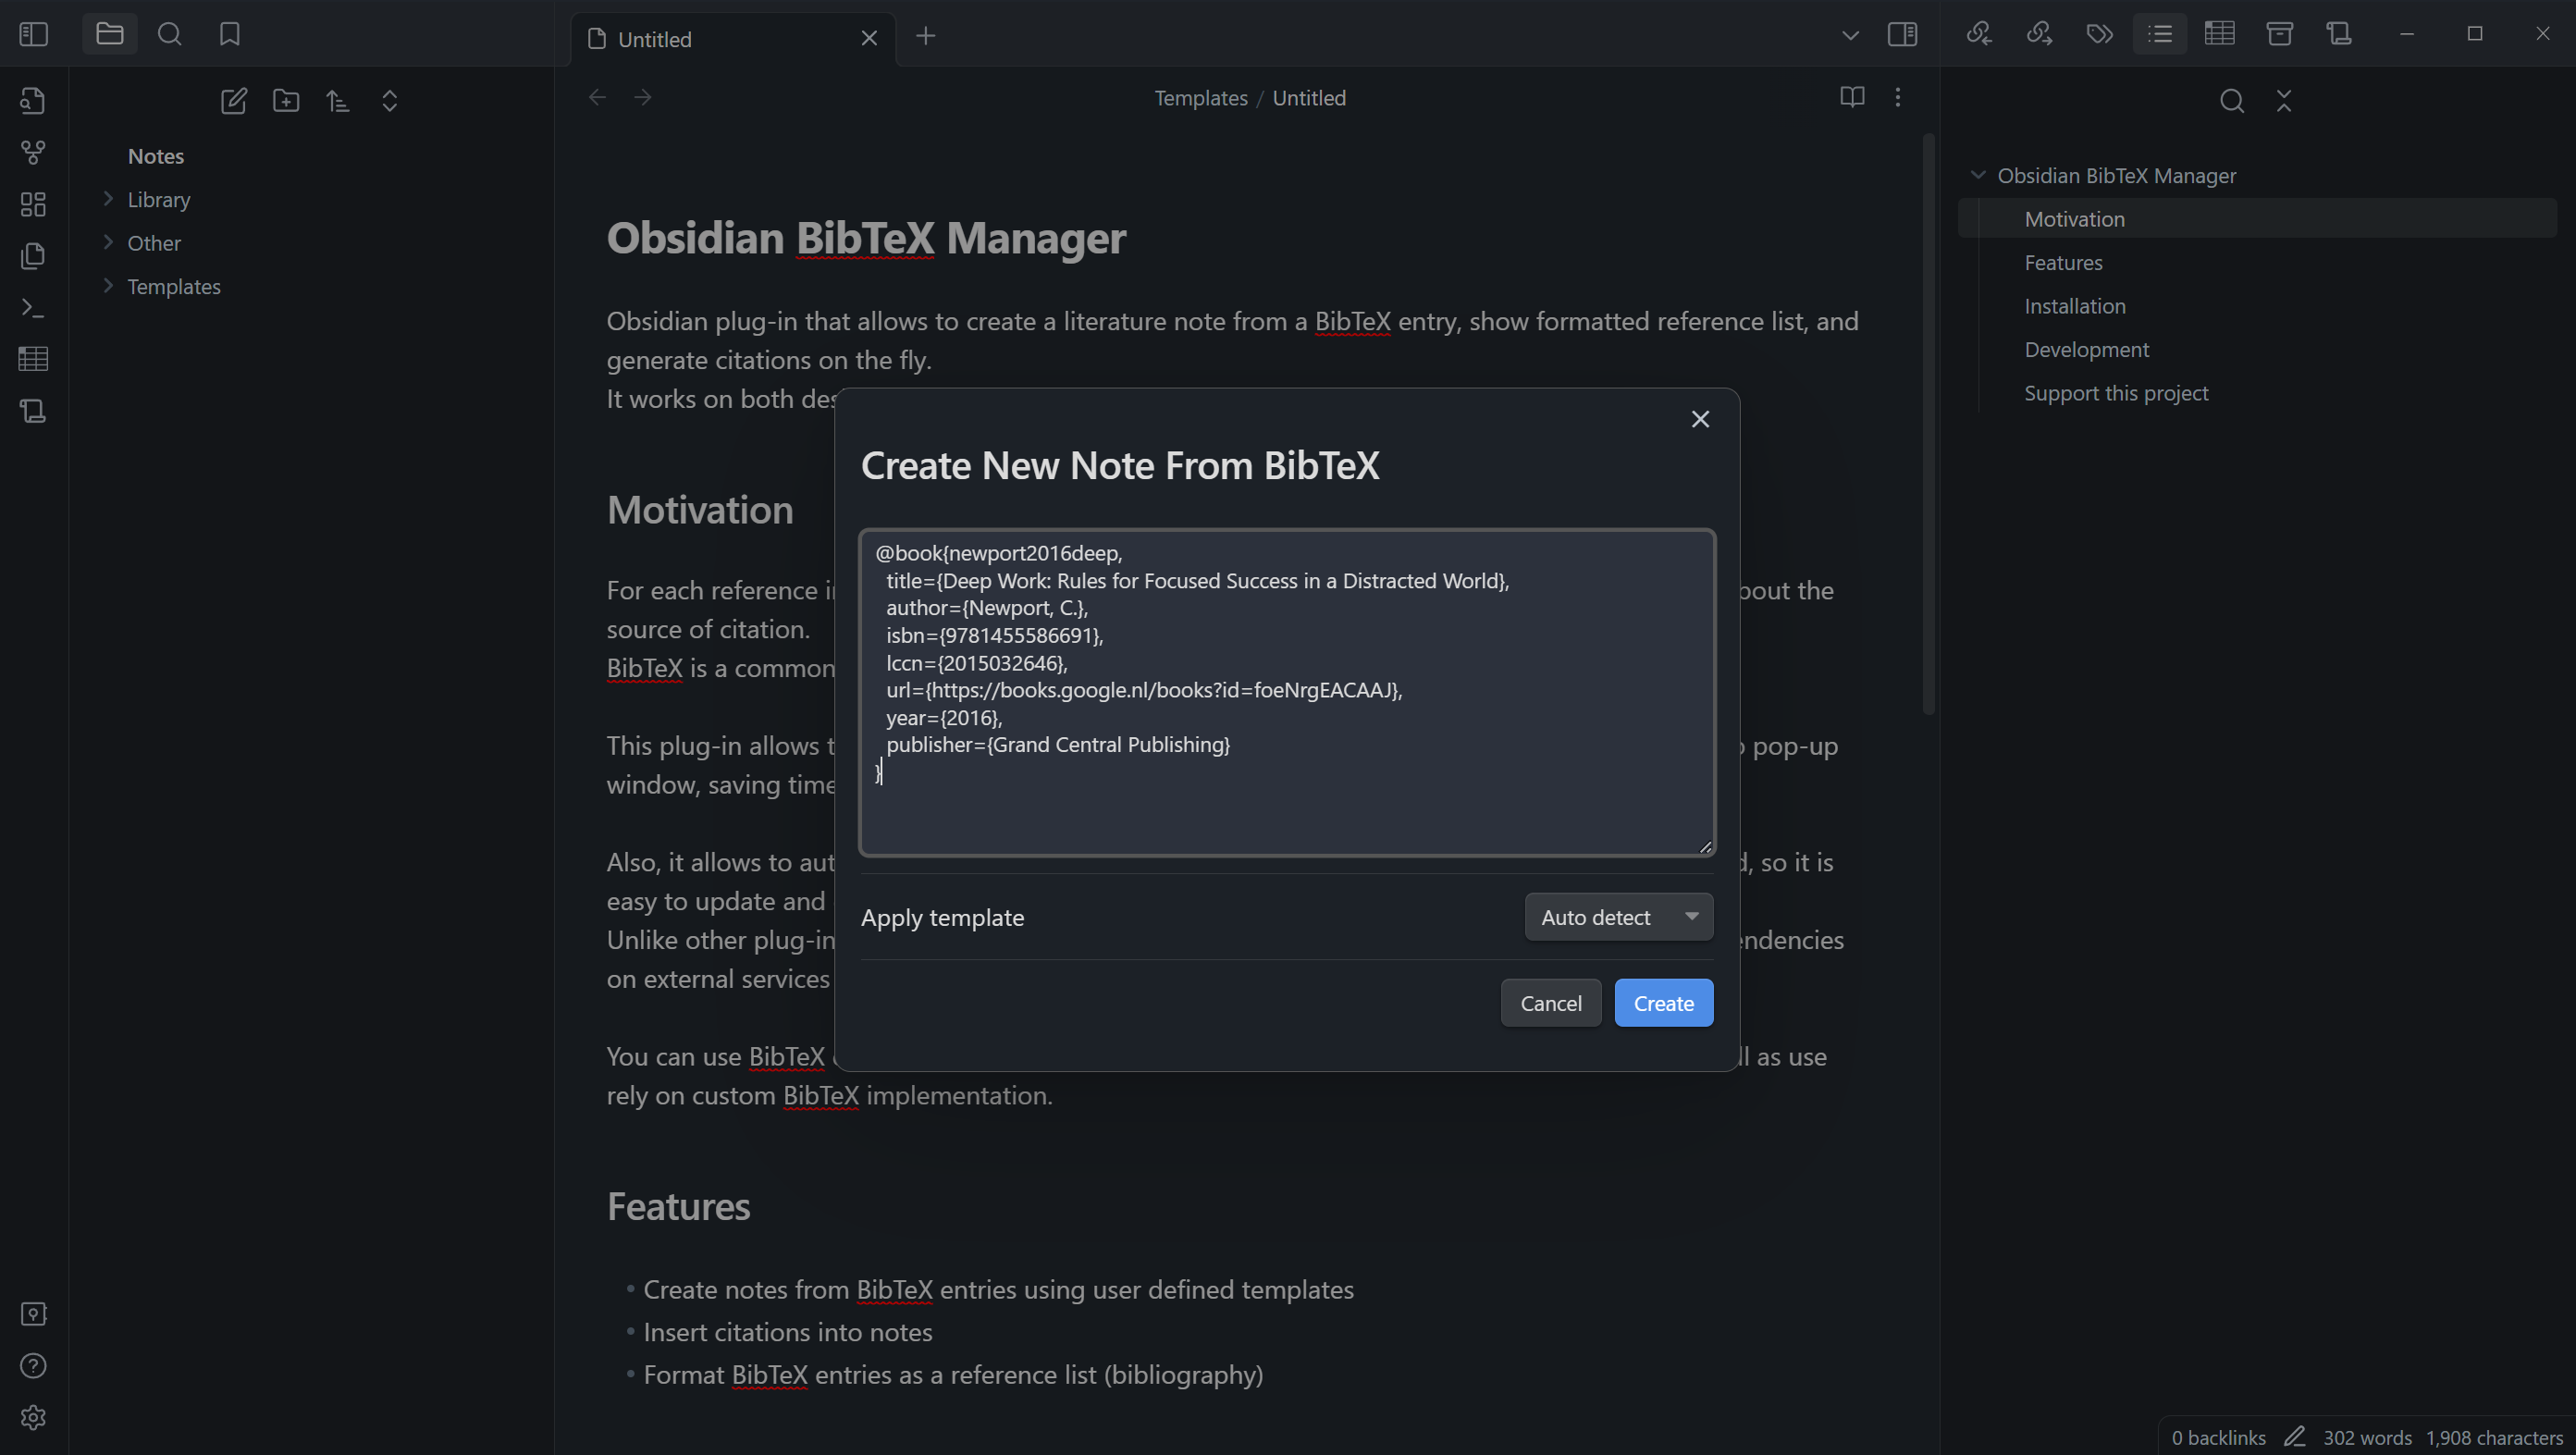 Create New Note in Obsidian BibteX Manager